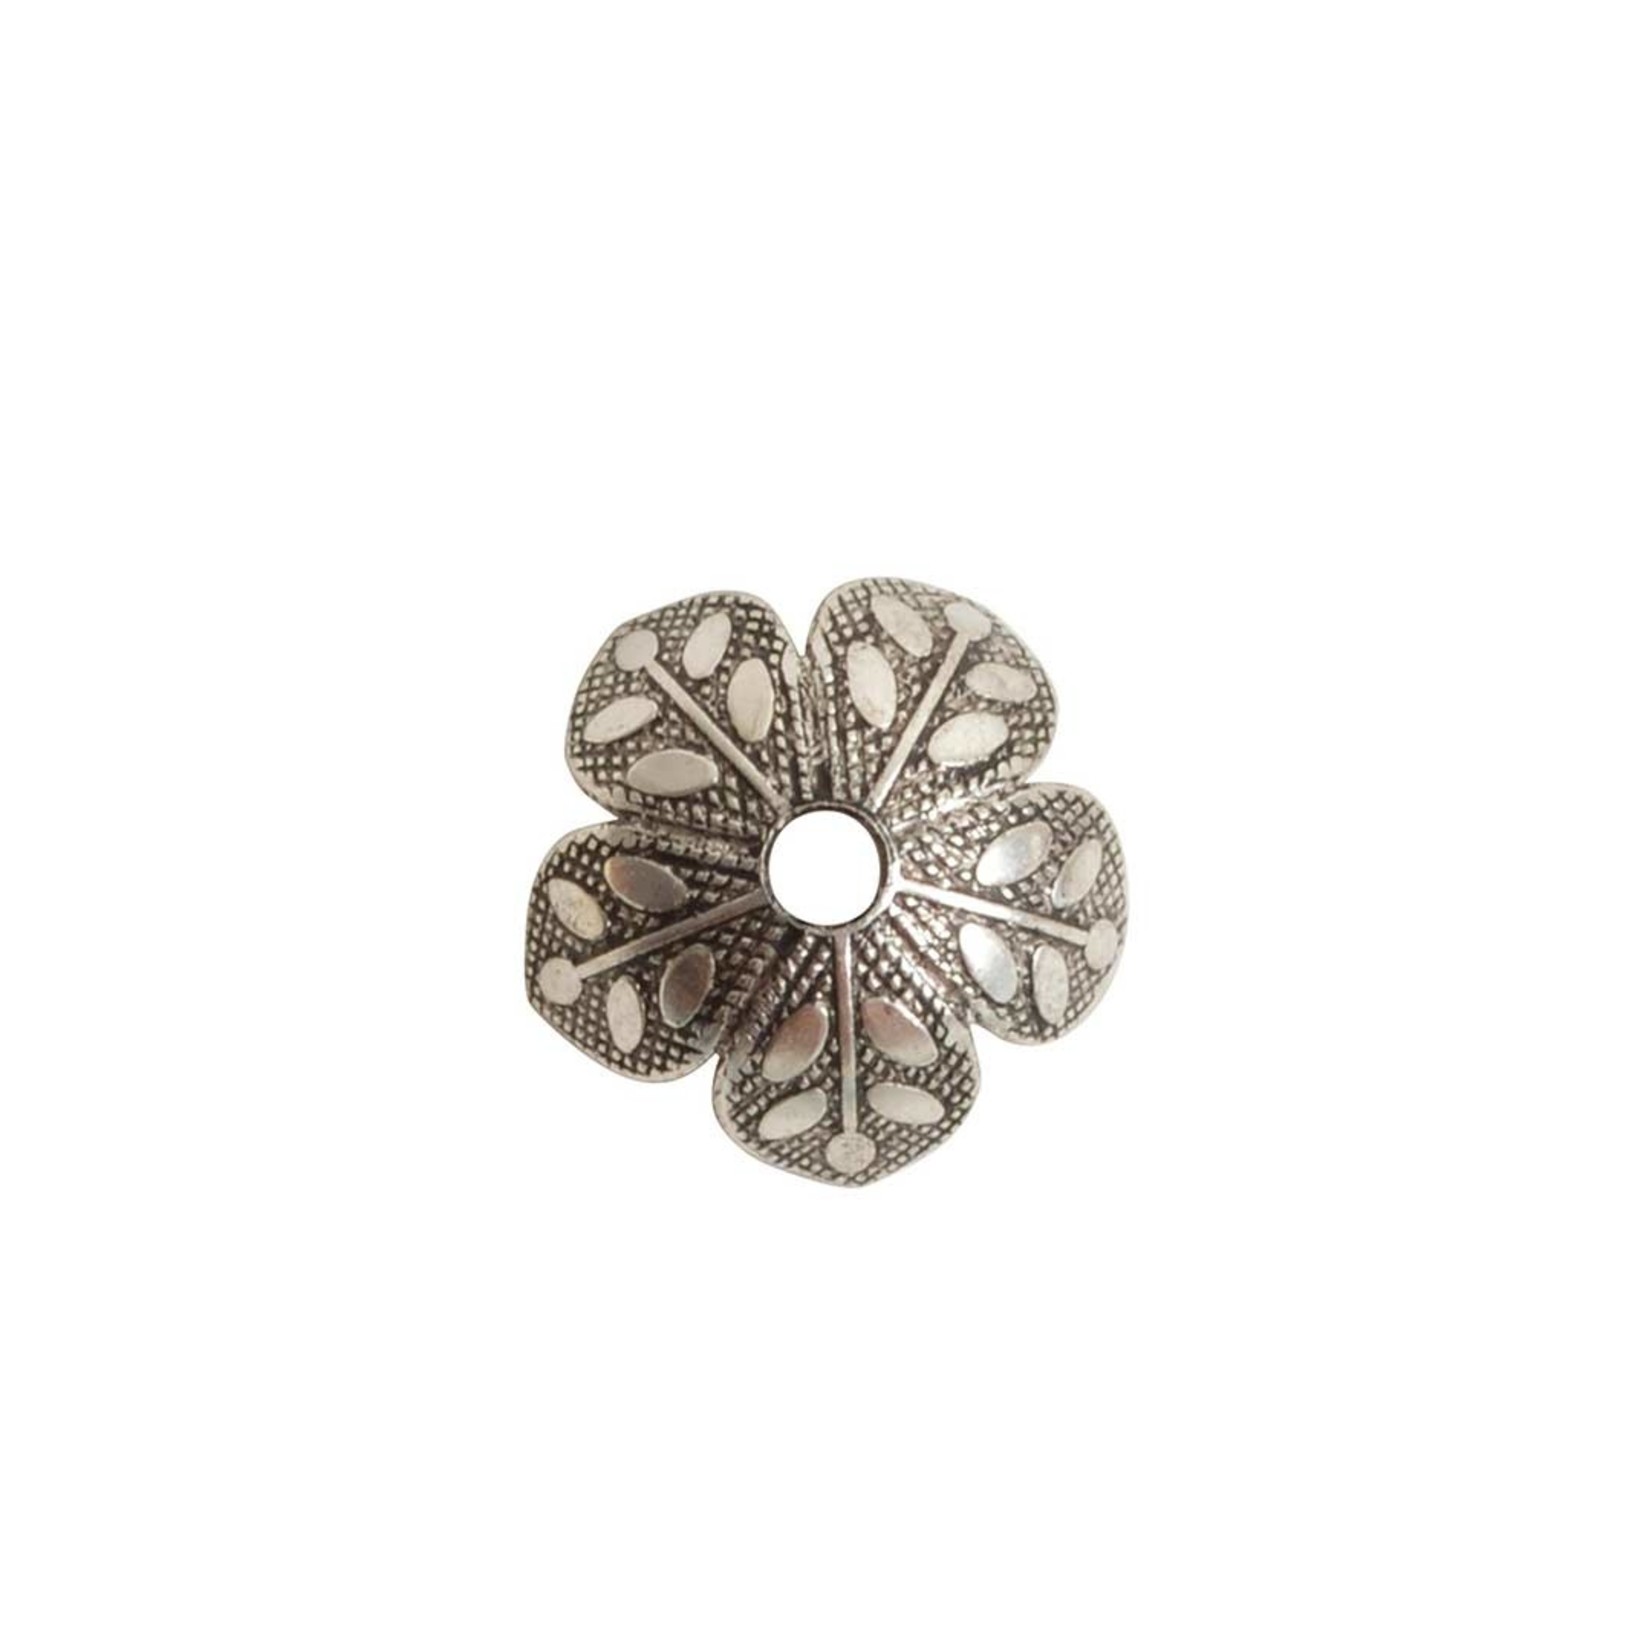 Foliage Bead cap Silver Plated 8mm